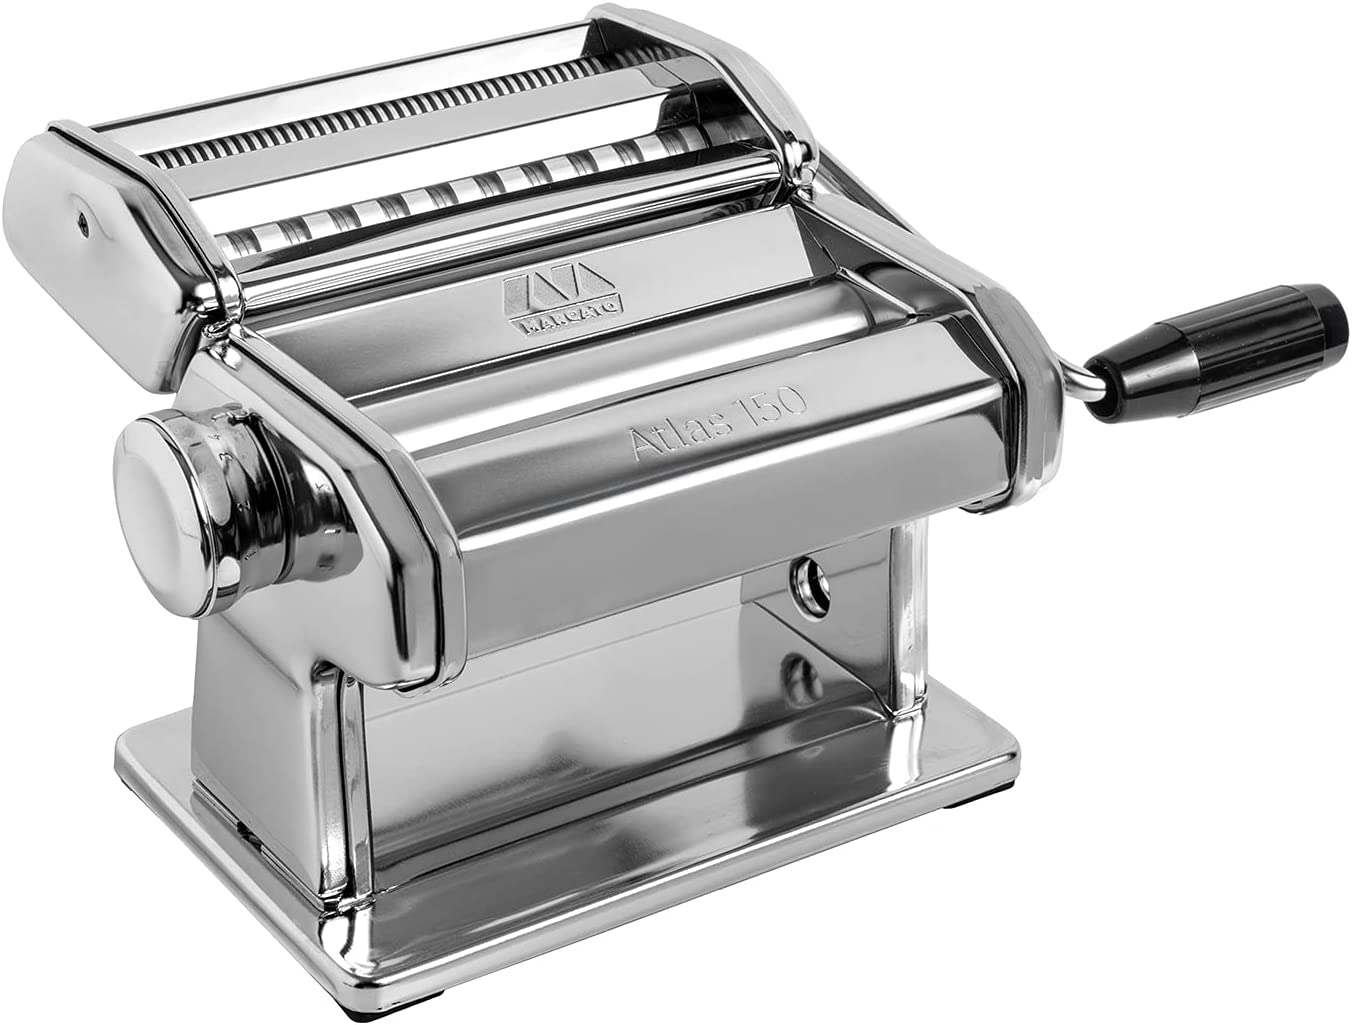 MARCATO Atlas 150 Pasta Machine, Made in Italy, Includes Cutter, Hand Crank, and Instructions, 150 mm, Stainless Steel Import To